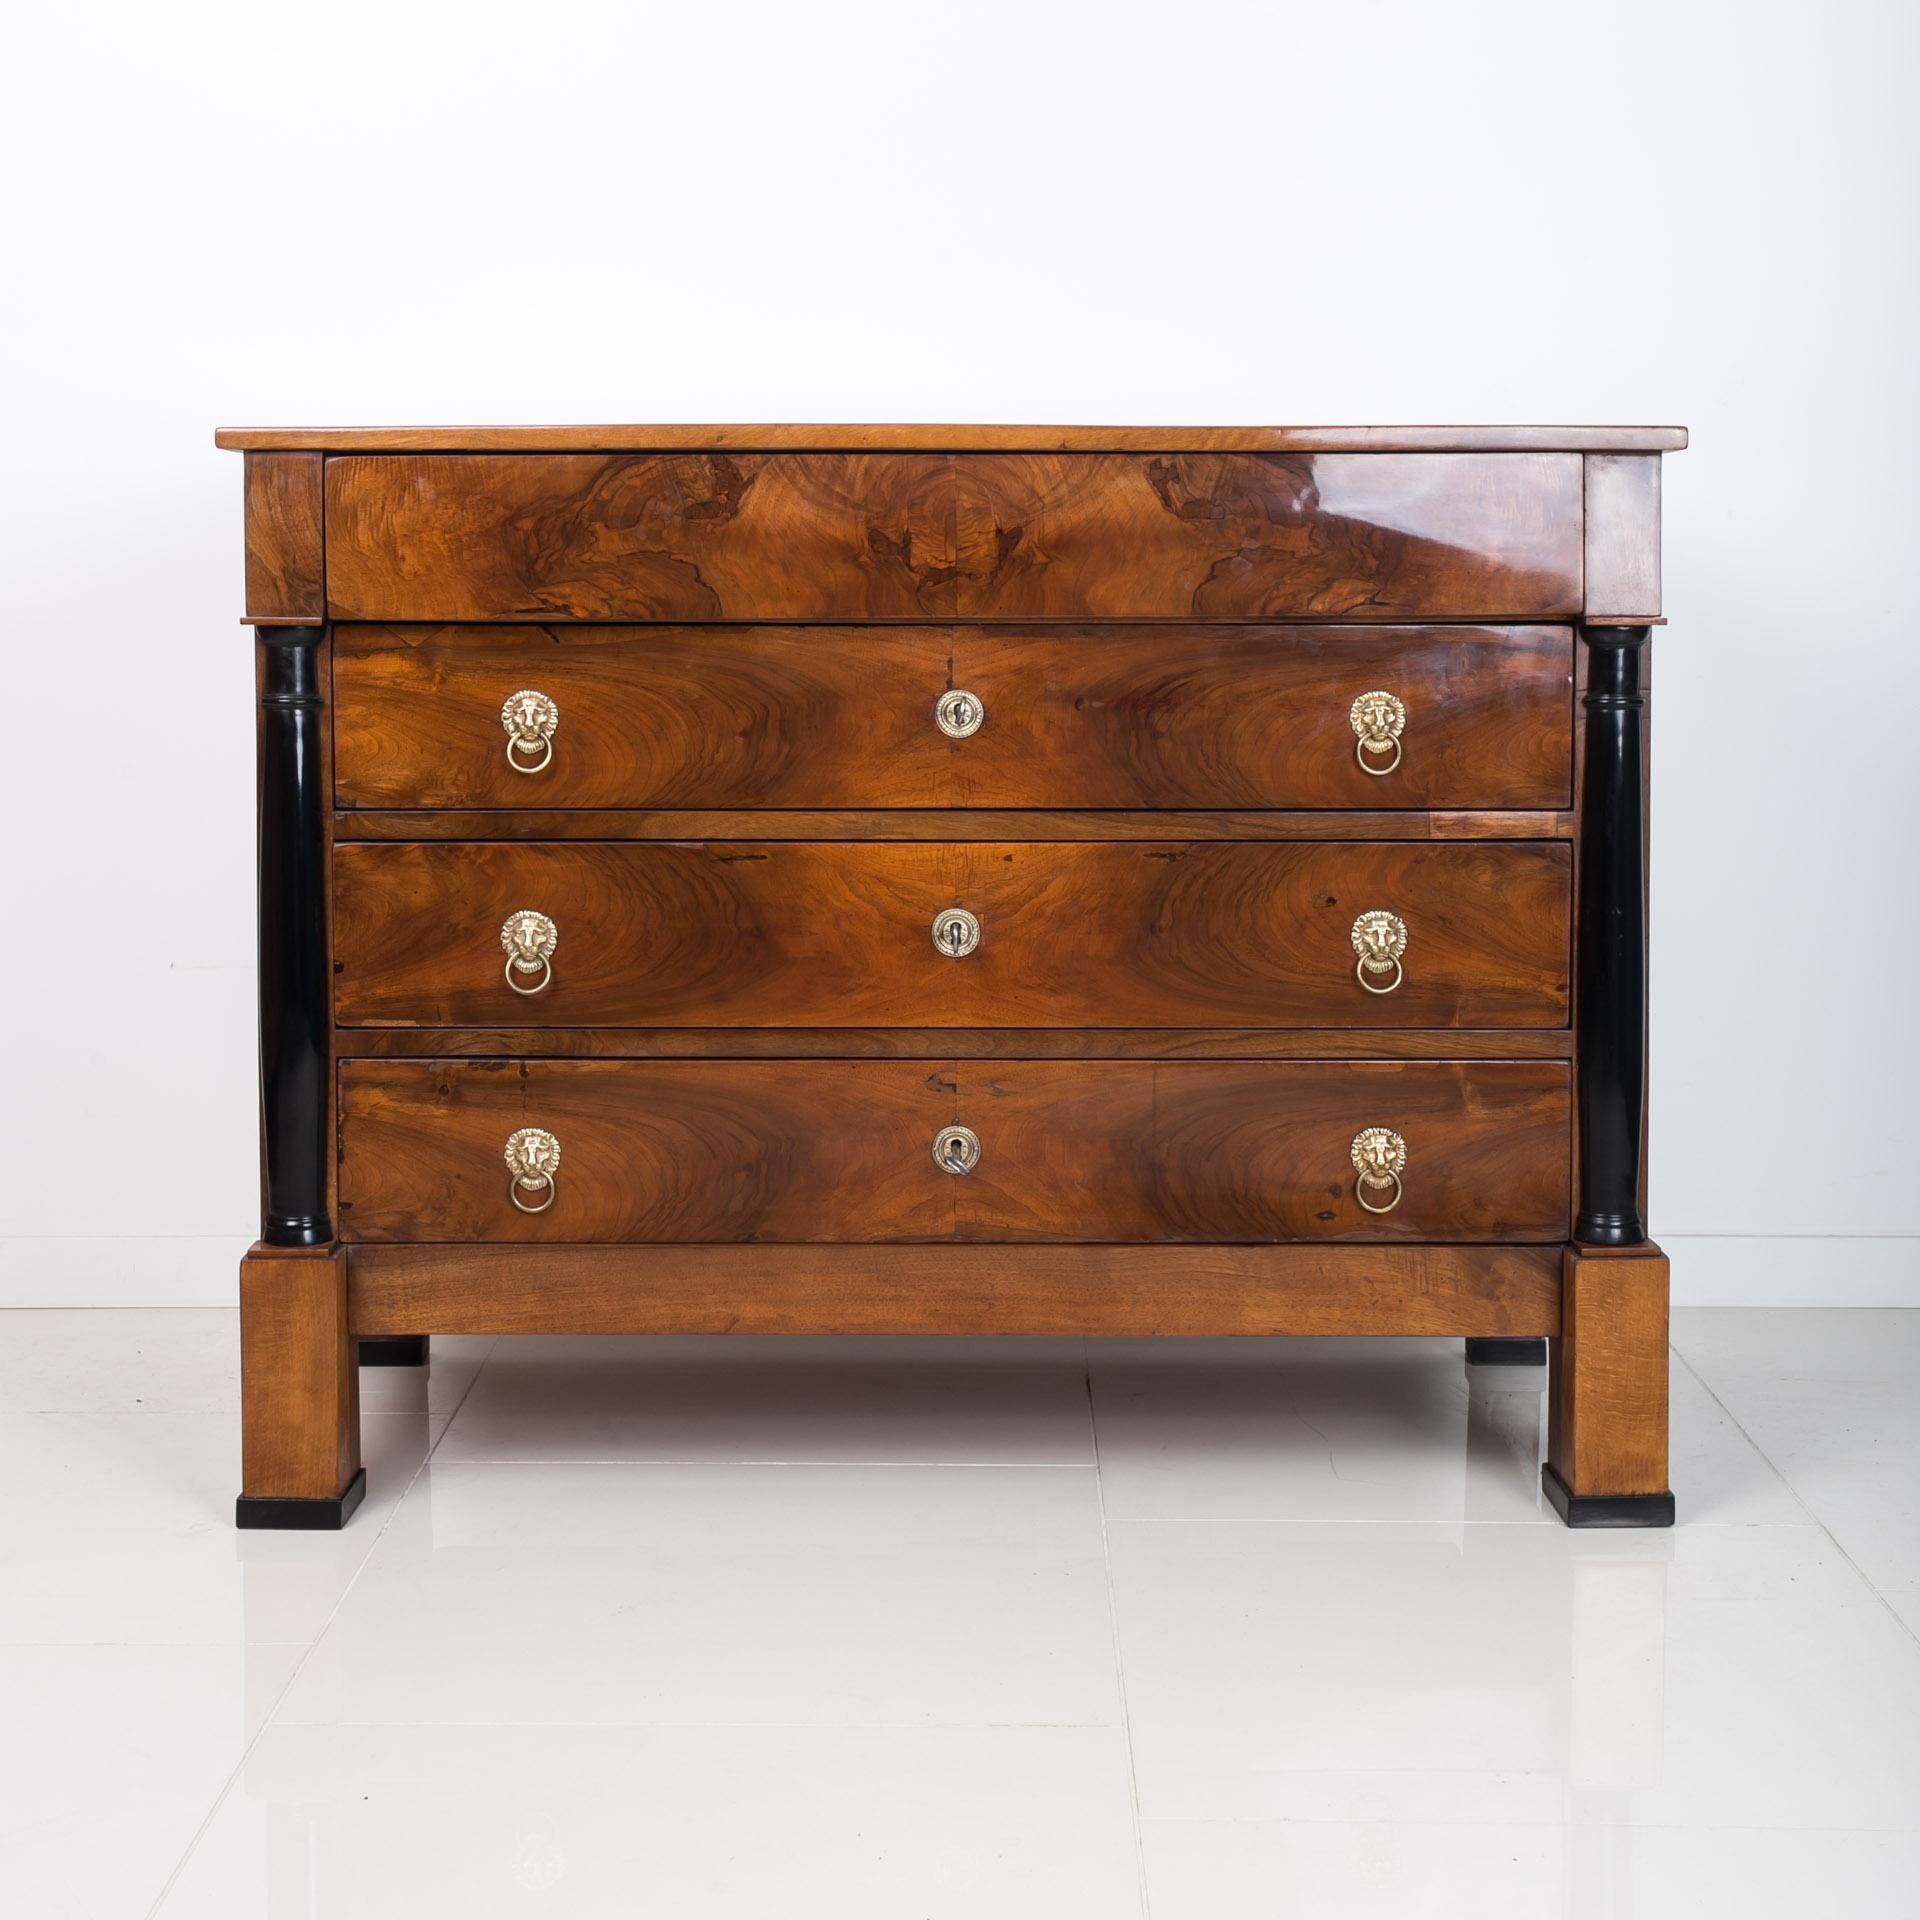 Biedermeier chest of drawers from first half of 19th century, approximately 1830 - 1850. This piece of furniture comes from France. It is veneered with beautiful walnut. It has undergone a careful renovation process in our workshop, during which the